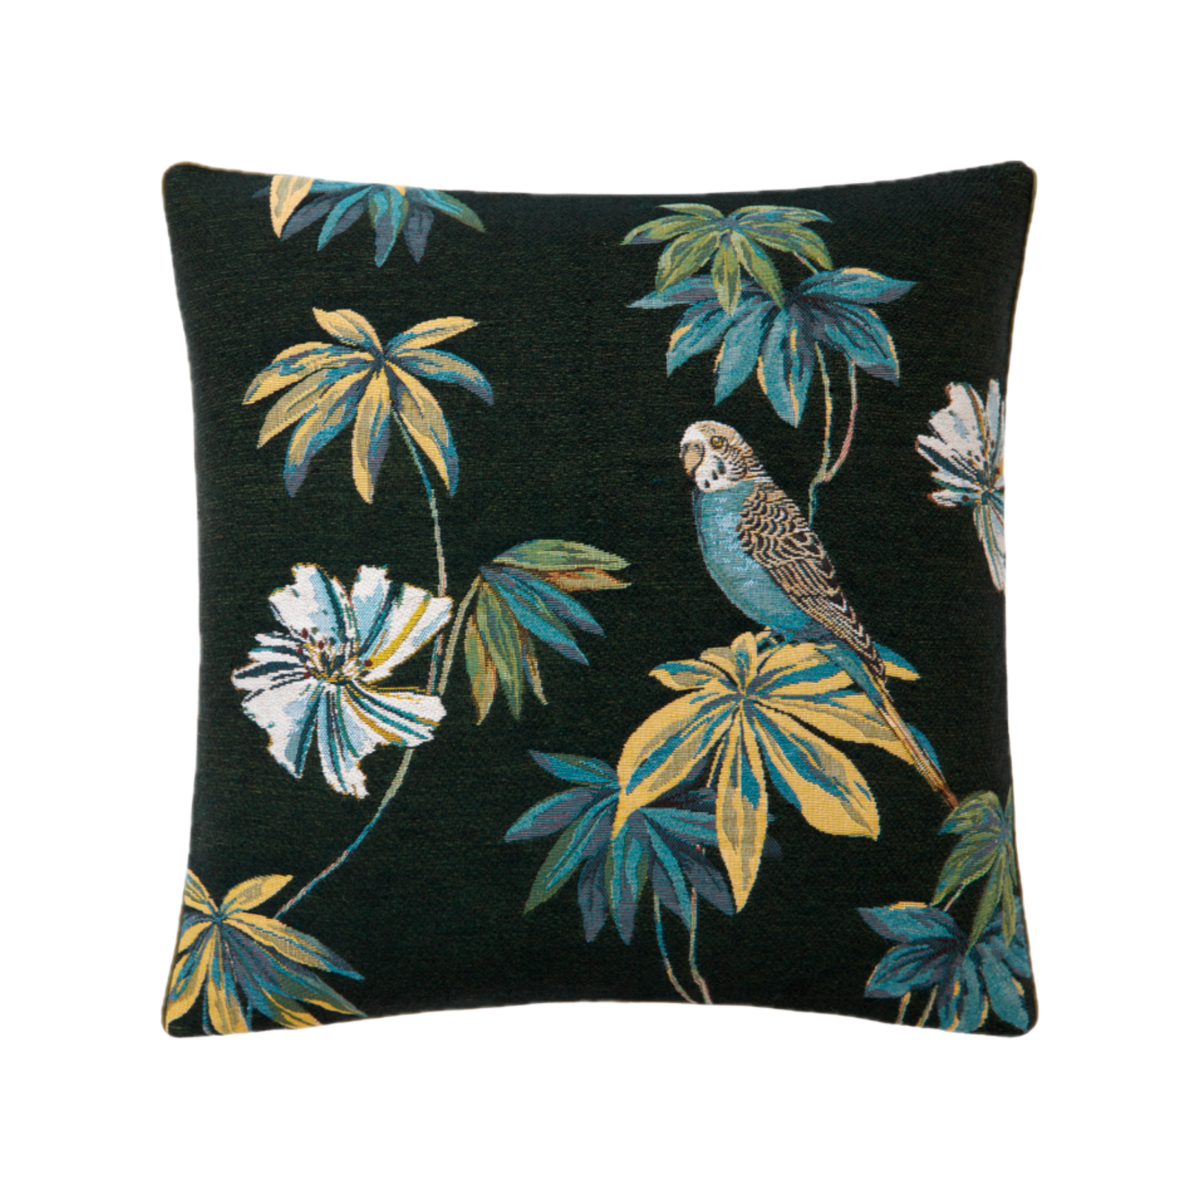 Decorative Pillow of Yves Delorme Tropical Bedding in Foret Color